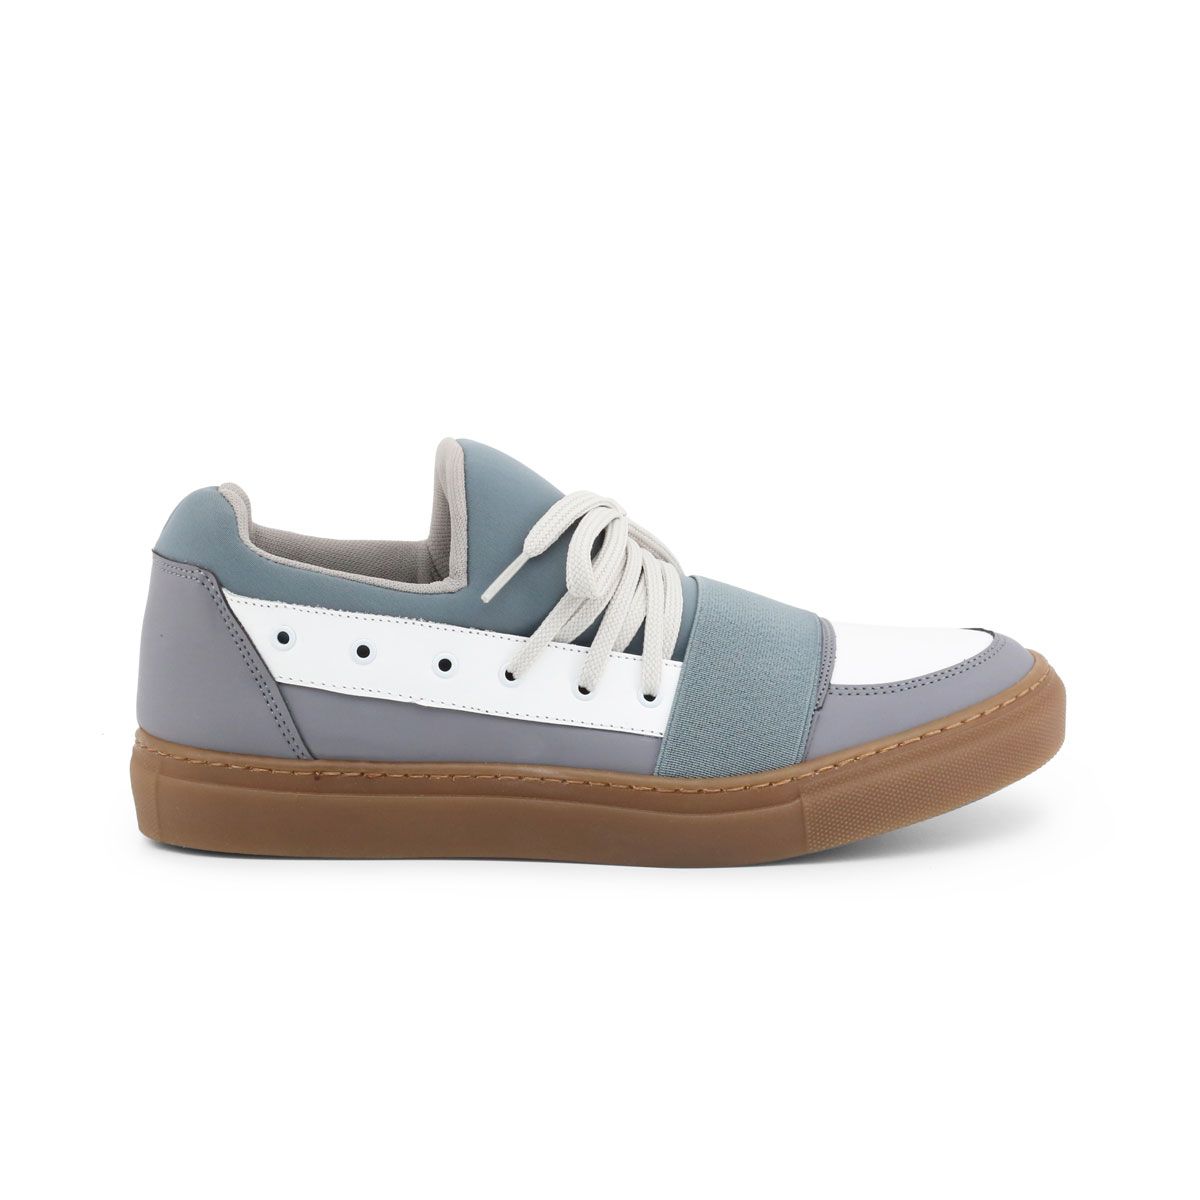 Made in: Italy <br> Gender: Man <br> Type: Sneakers <br> Upper: rubber, synthetic material, leather <br> Internal lining: synthetic material <br> Sole: rubber <br> Details: metal eyelets, round toe